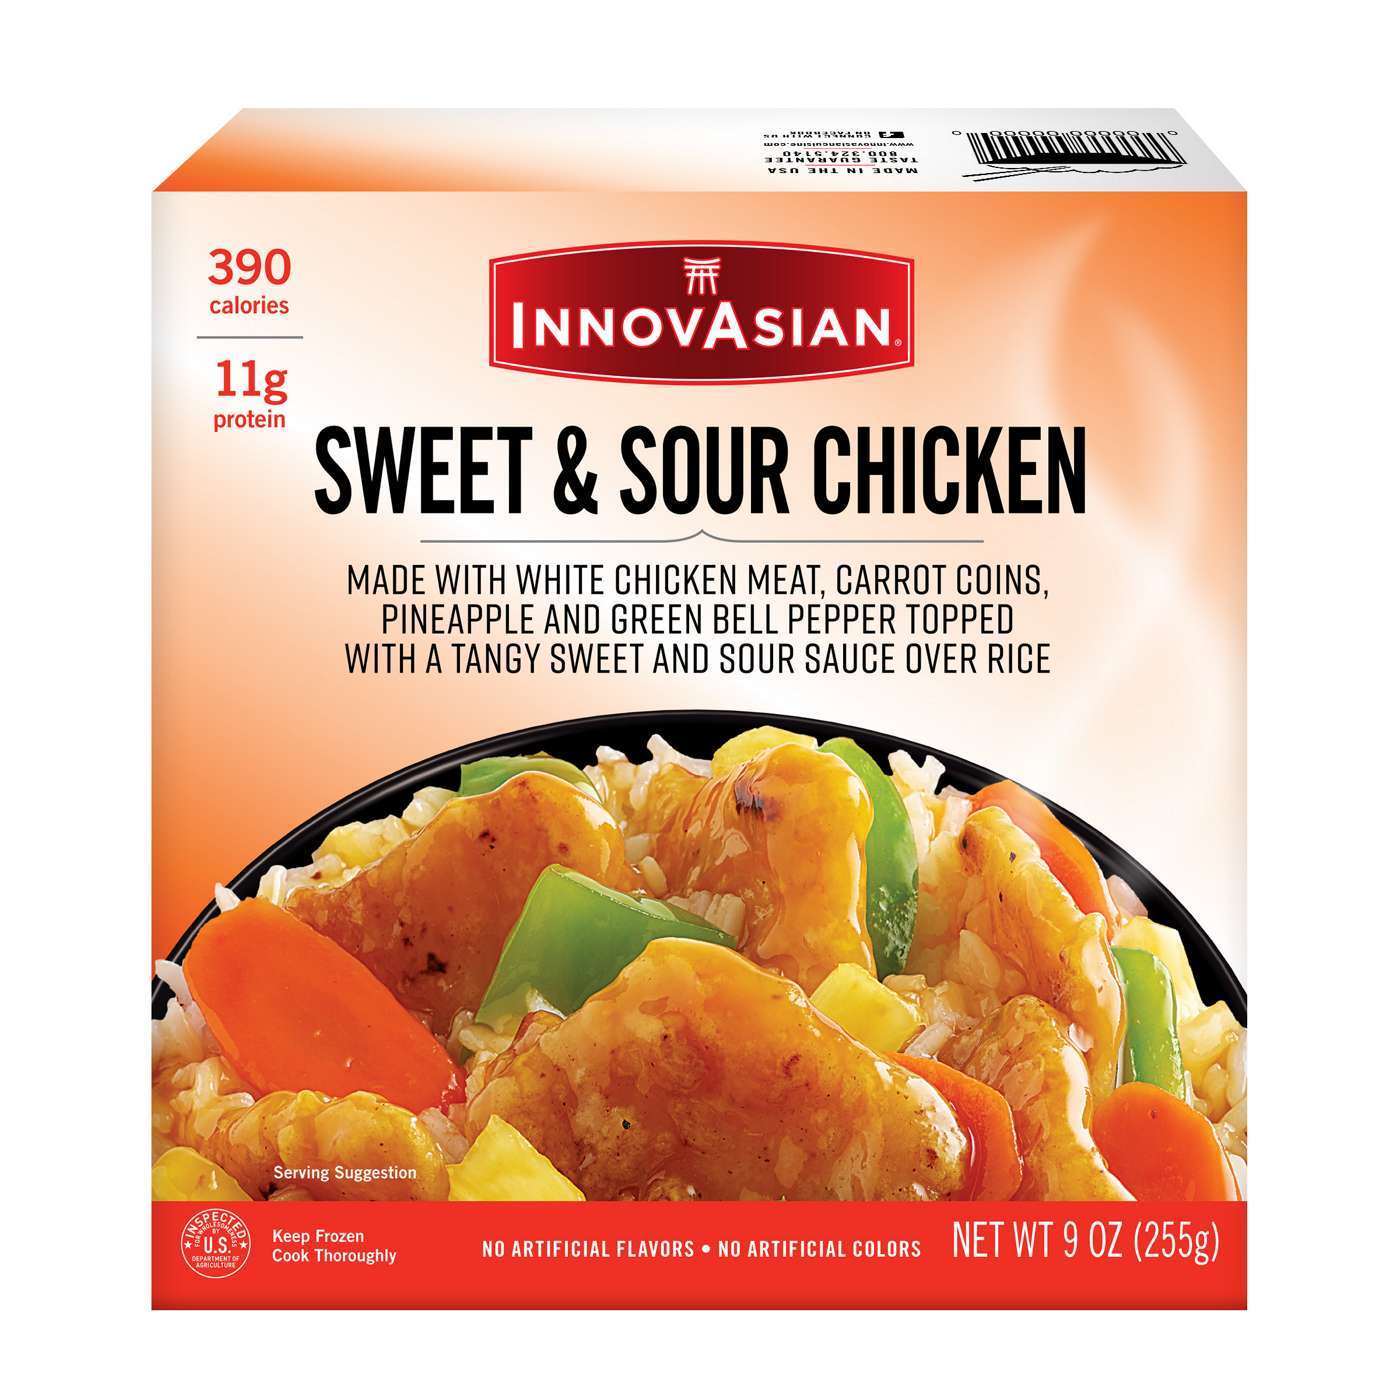 InnovAsian Sweet & Sour Chicken Frozen Meal; image 1 of 2